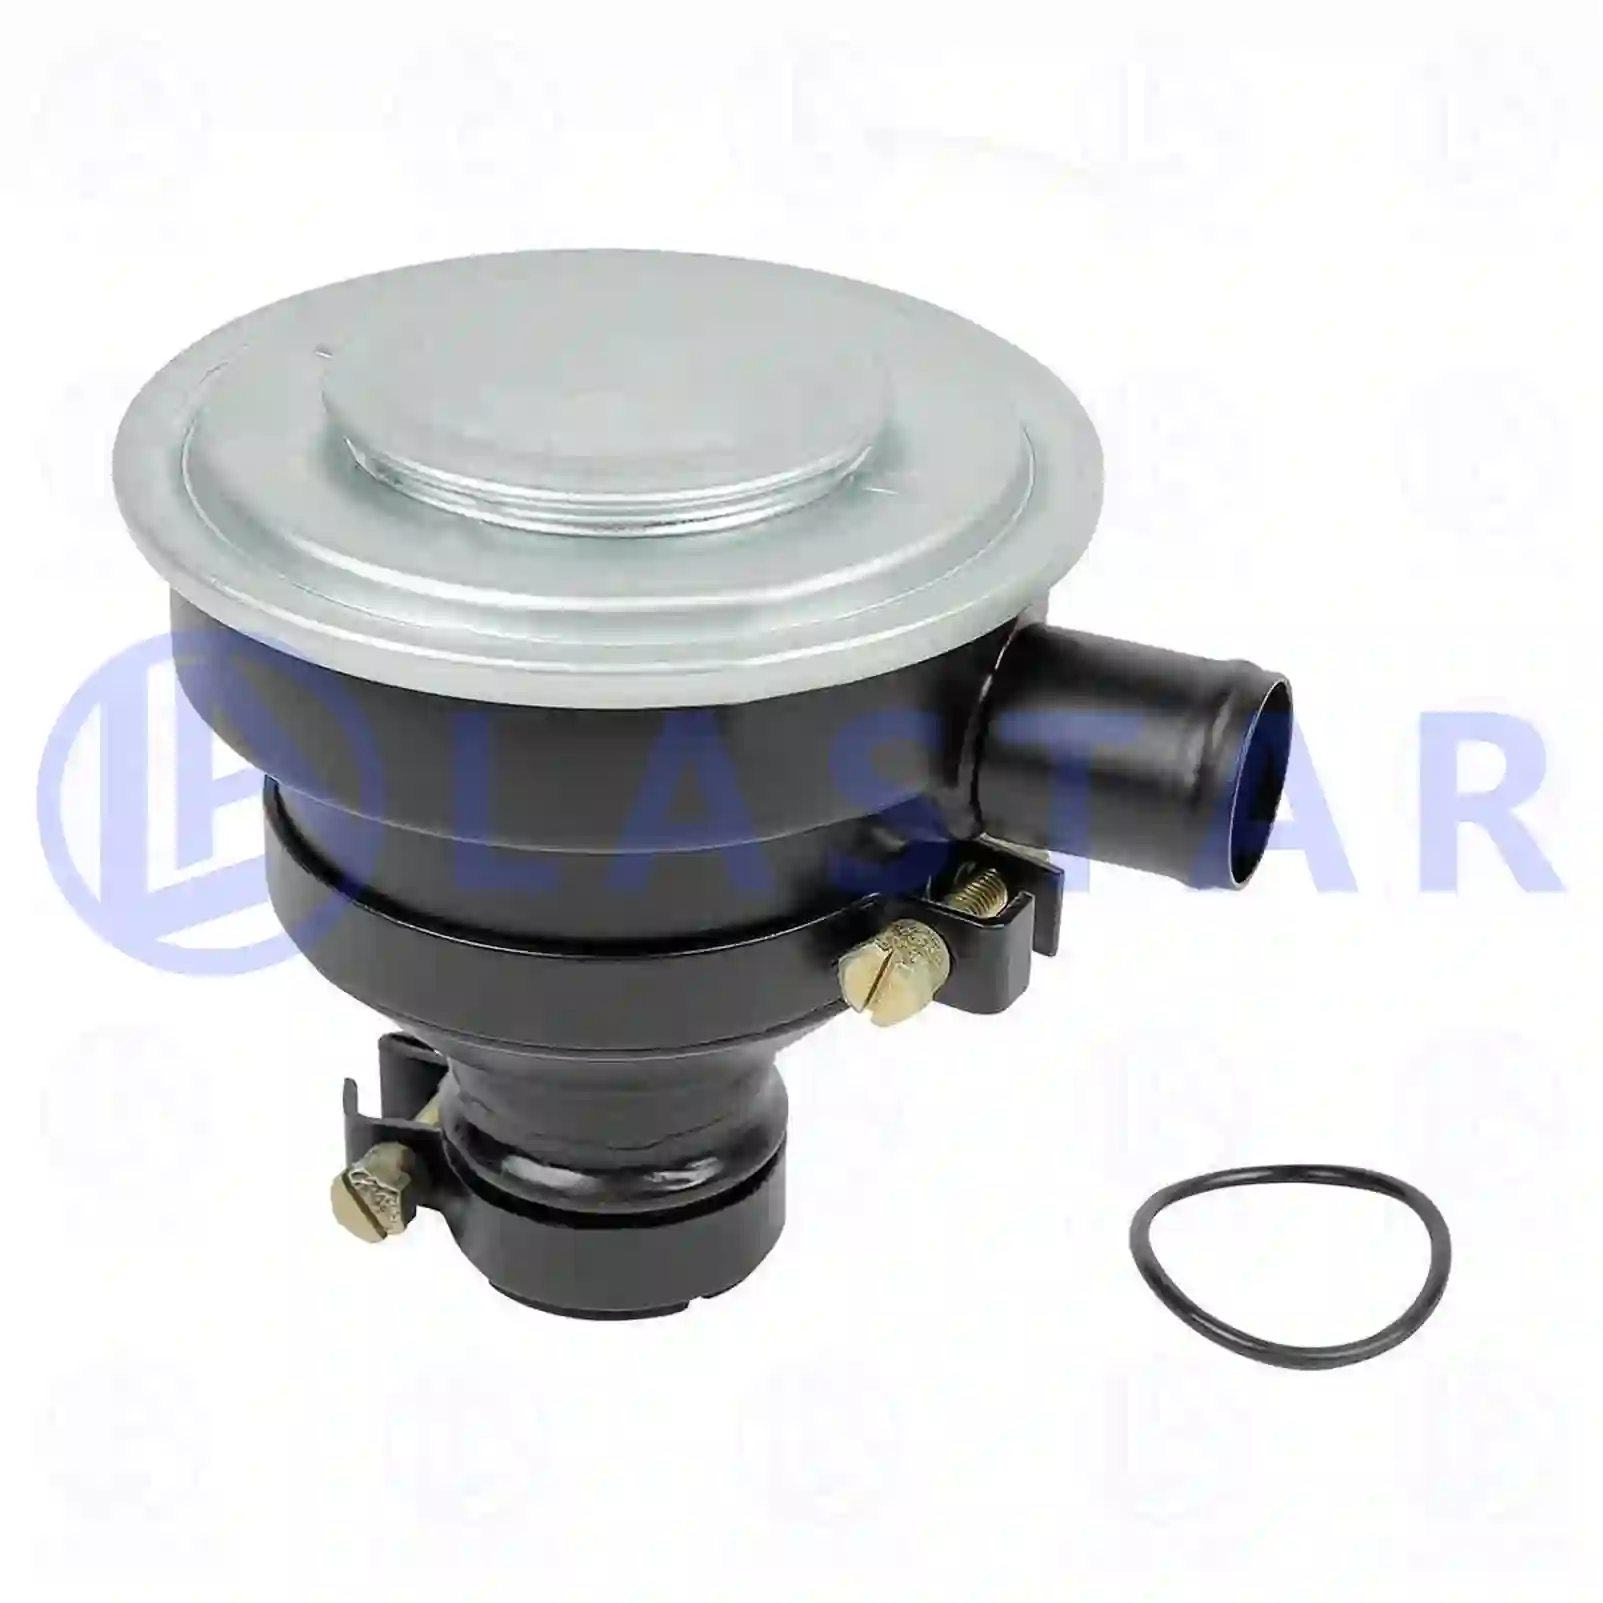 Oil separator, complete with o-ring, 77701912, 51018047032, 3520100062, 3520100162 ||  77701912 Lastar Spare Part | Truck Spare Parts, Auotomotive Spare Parts Oil separator, complete with o-ring, 77701912, 51018047032, 3520100062, 3520100162 ||  77701912 Lastar Spare Part | Truck Spare Parts, Auotomotive Spare Parts